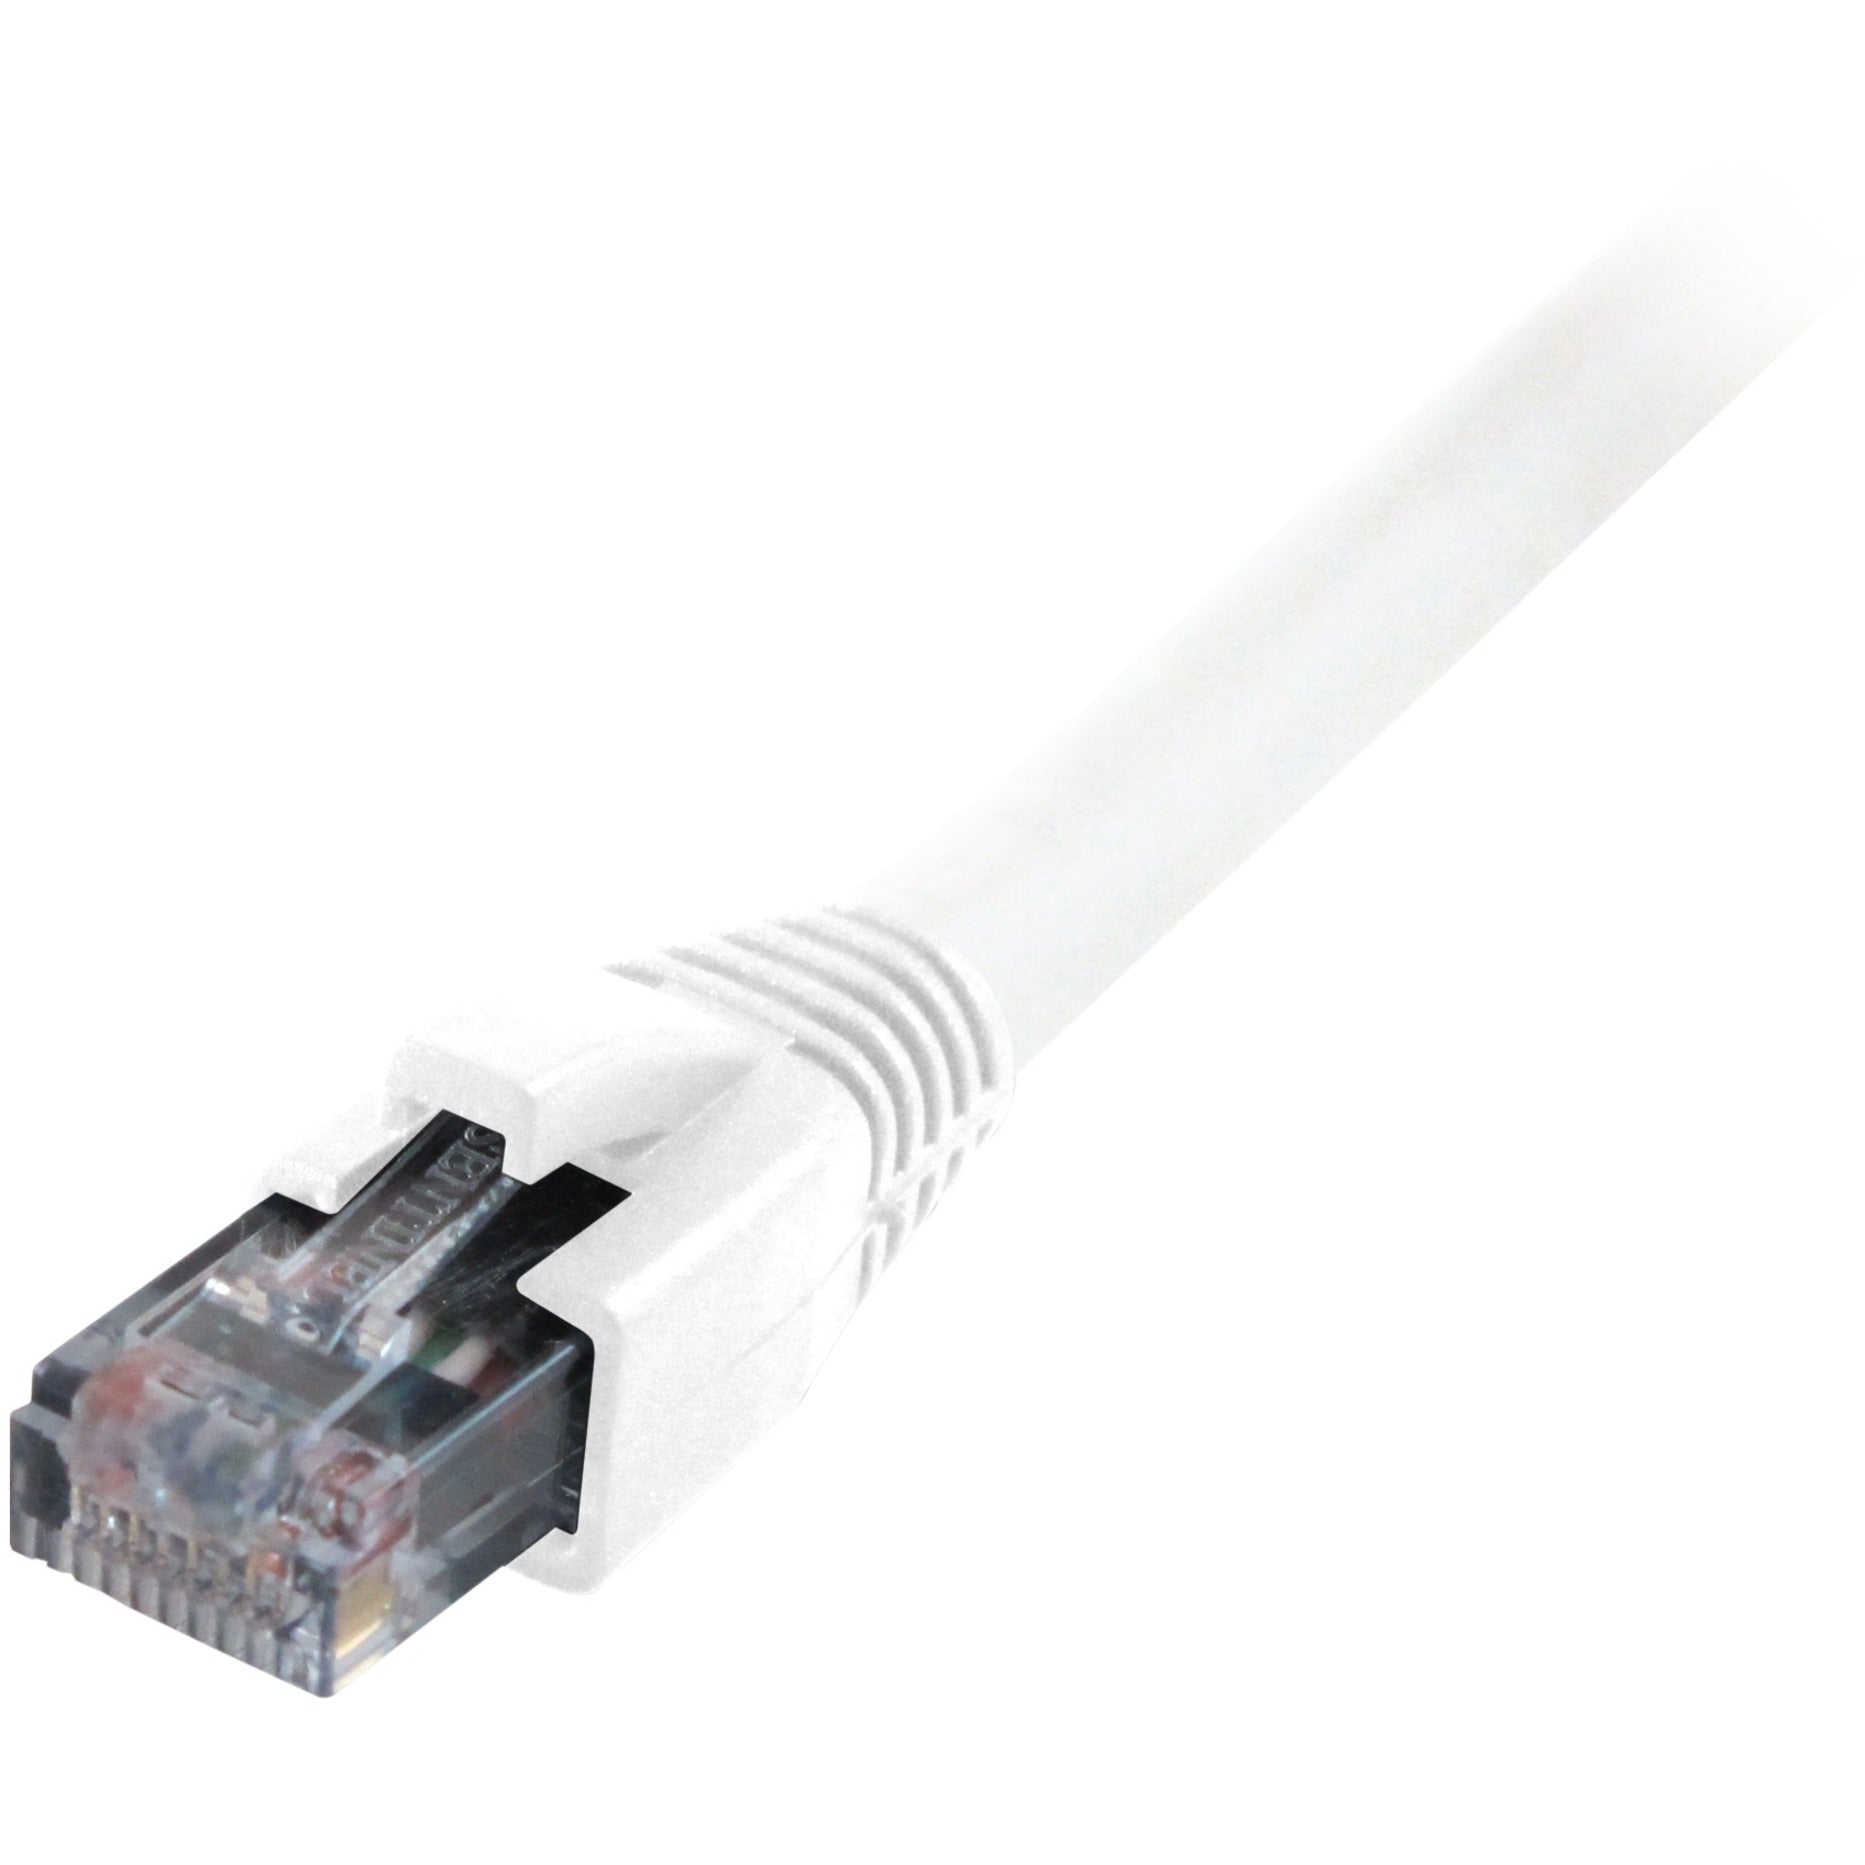 Comprehensive CAT5-350-10WHT Cat5e 350 Mhz Snagless Patch Cable 10ft White, Molded, Strain Relief, Stranded, Booted, 1 Gbit/s Data Transfer Rate